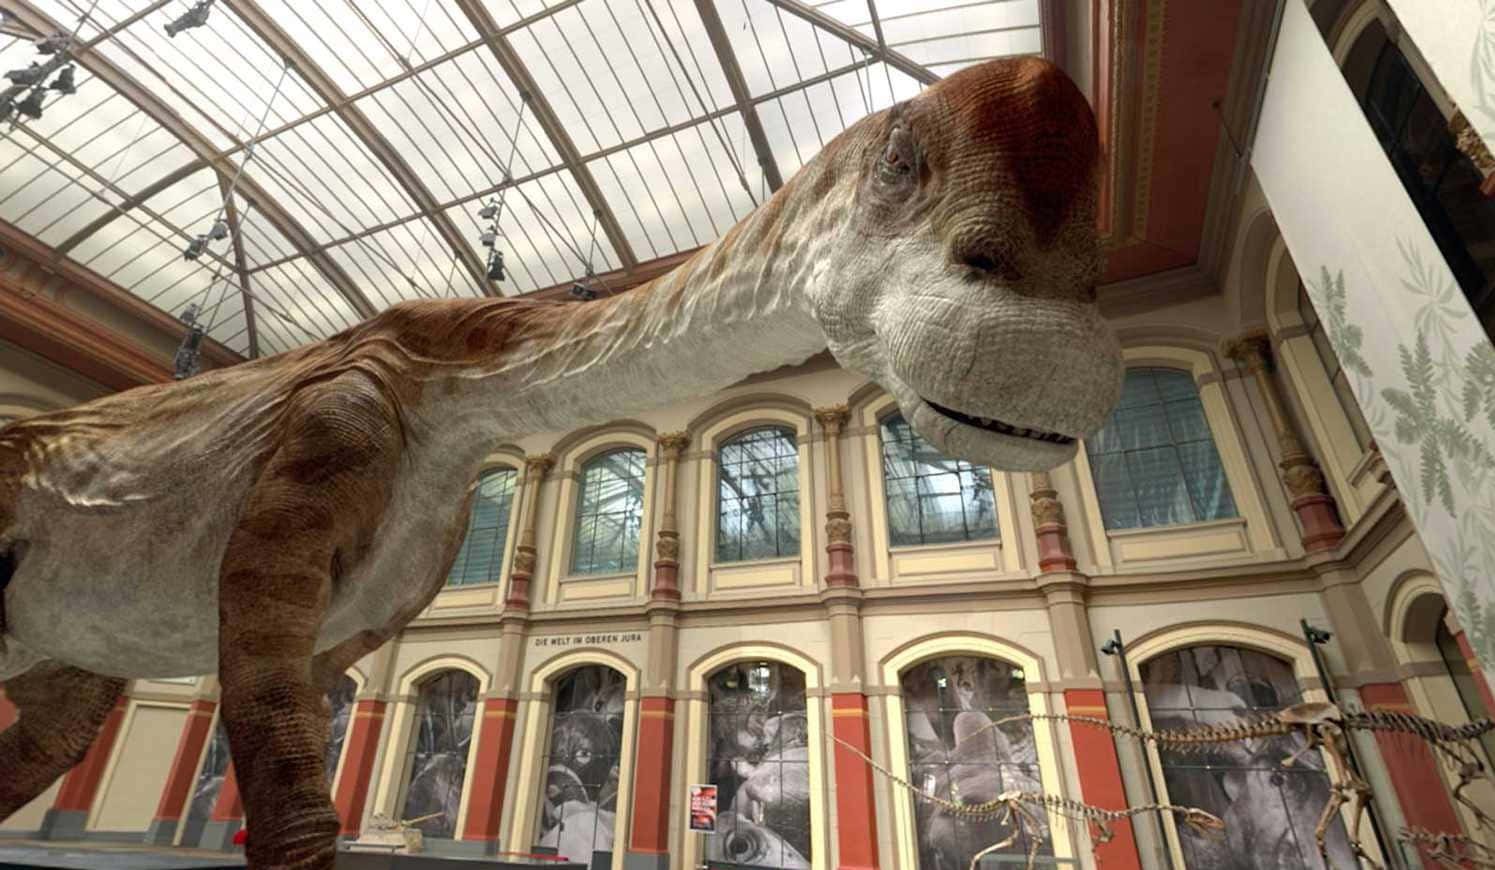 A Large Dinosaur Is Displayed In A Museum